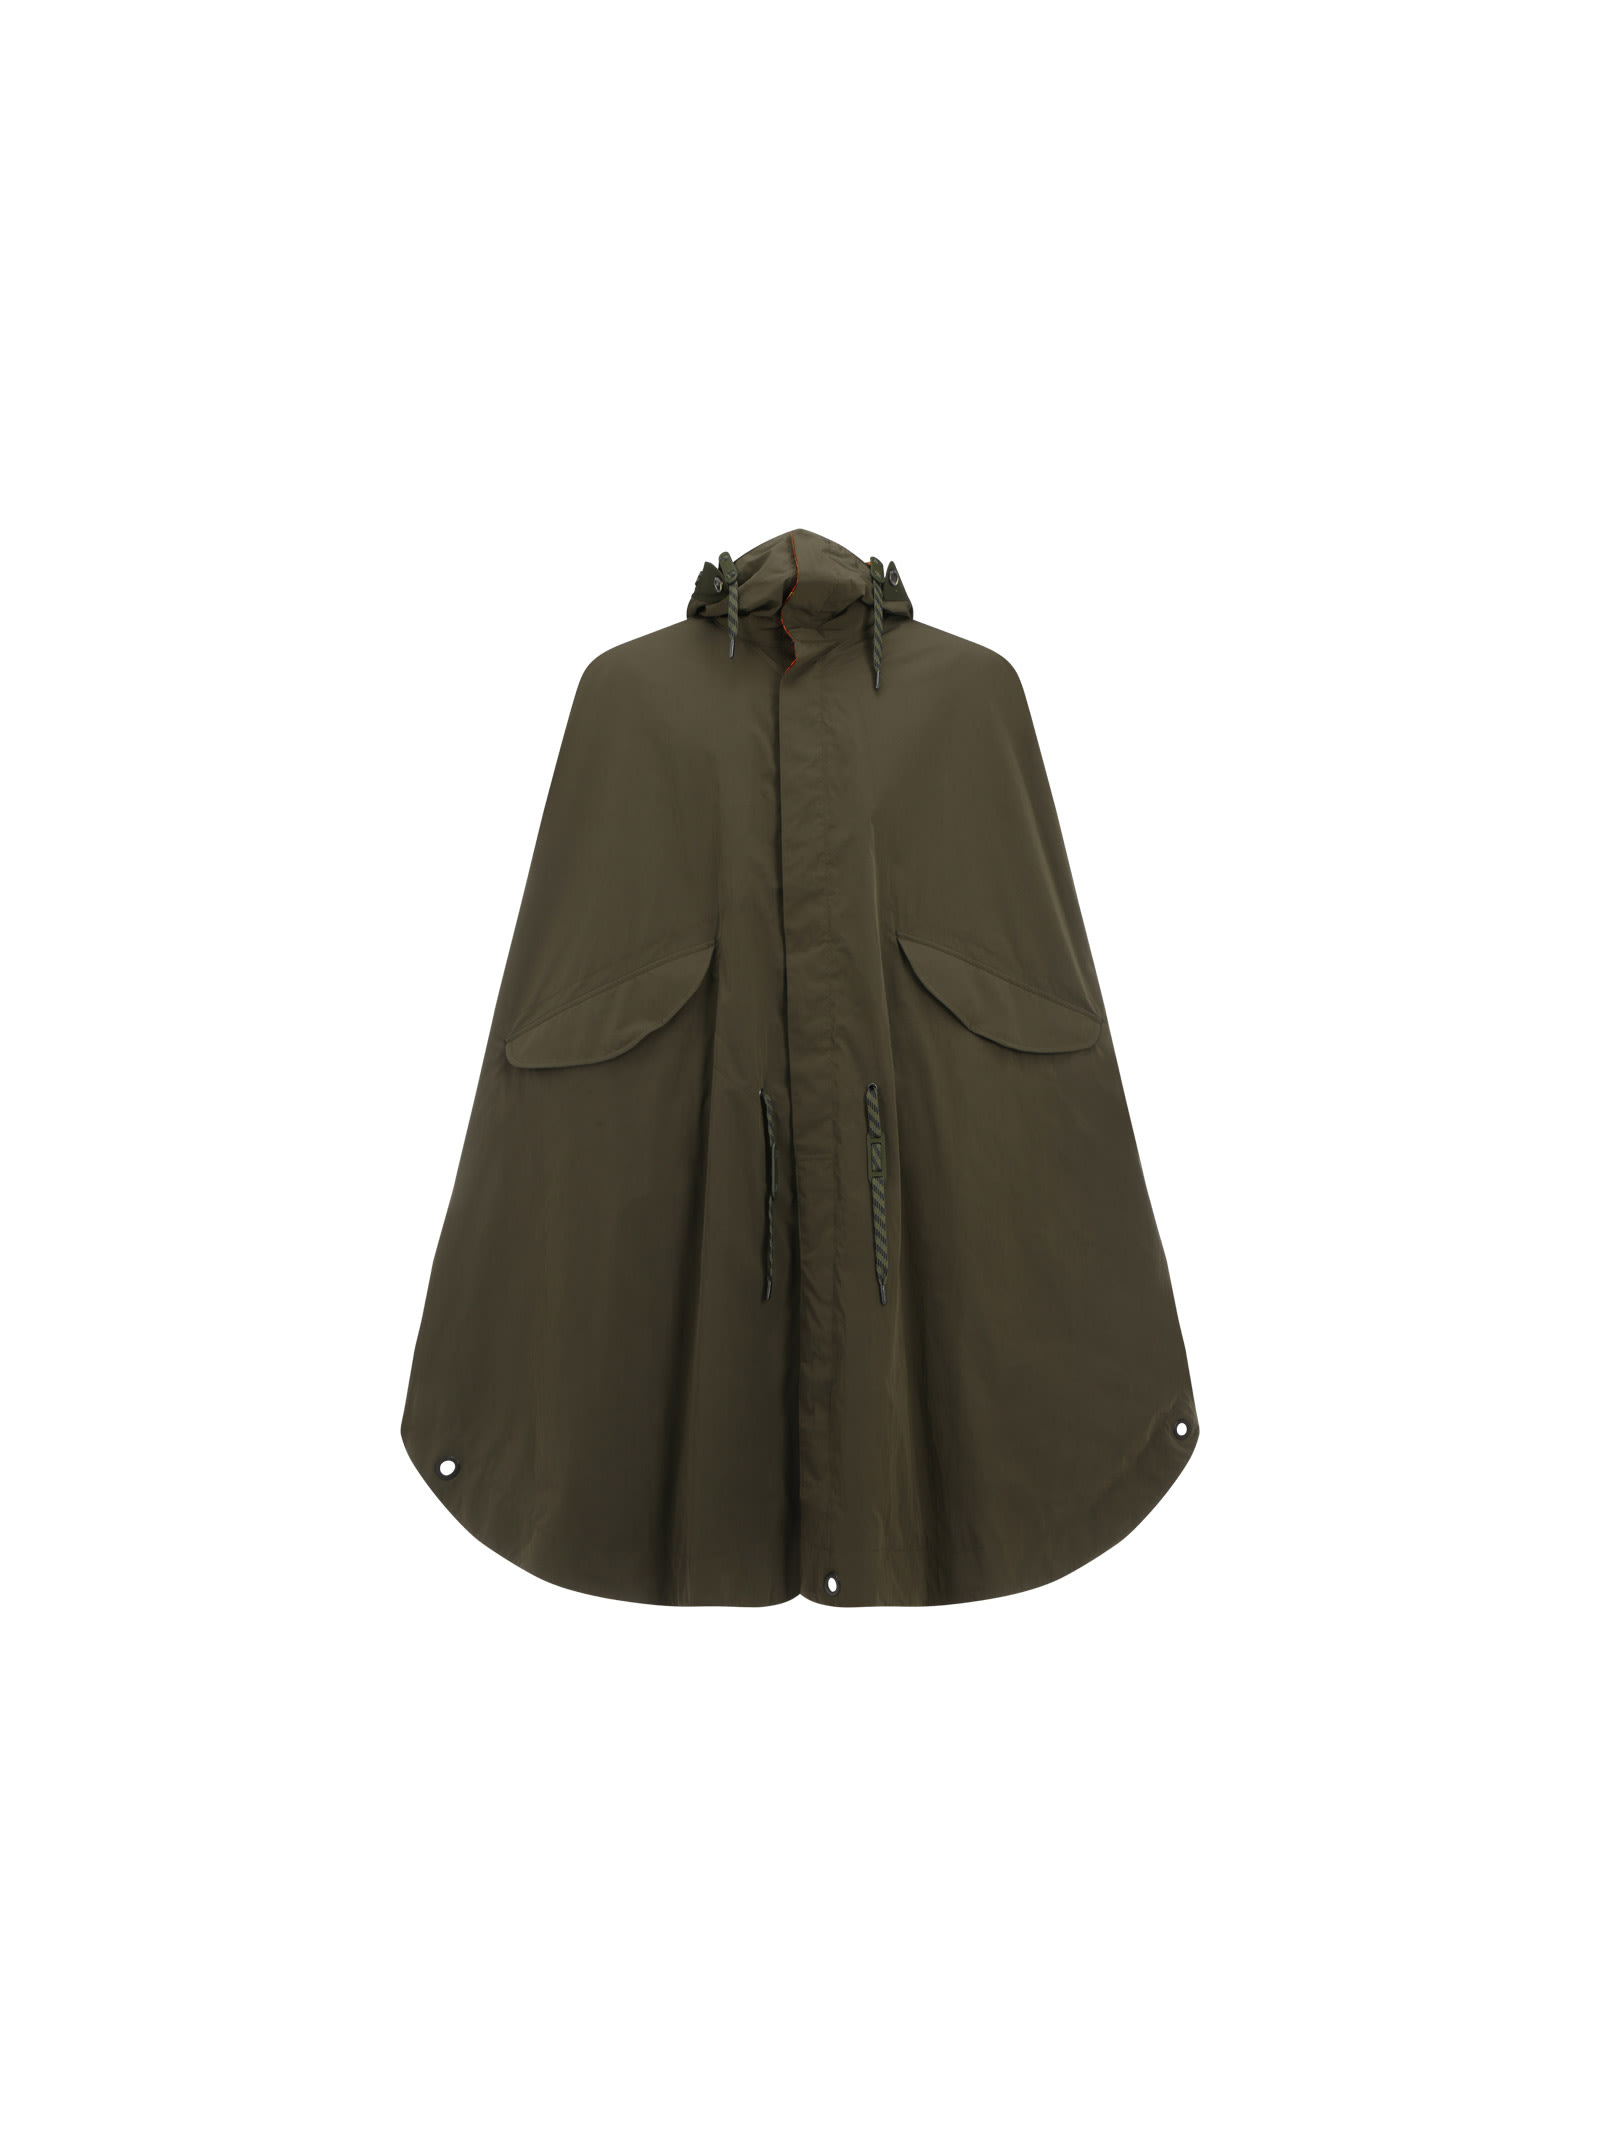 Burberry Braidley Trench Coat